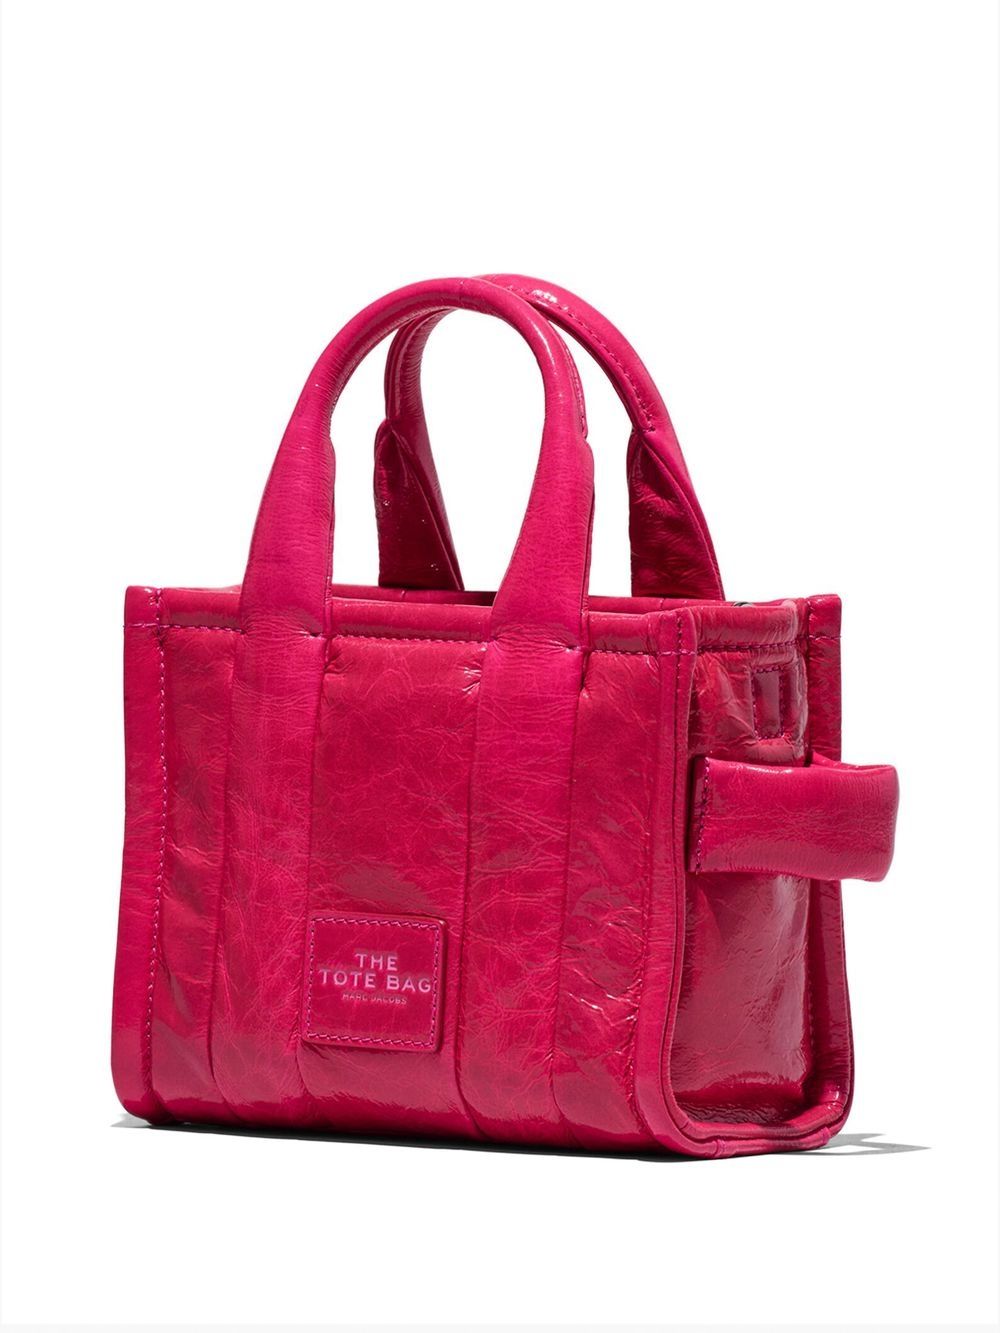 Marc Jacobs - Tote Bag by Marc Jacobs: el complemento perfecto